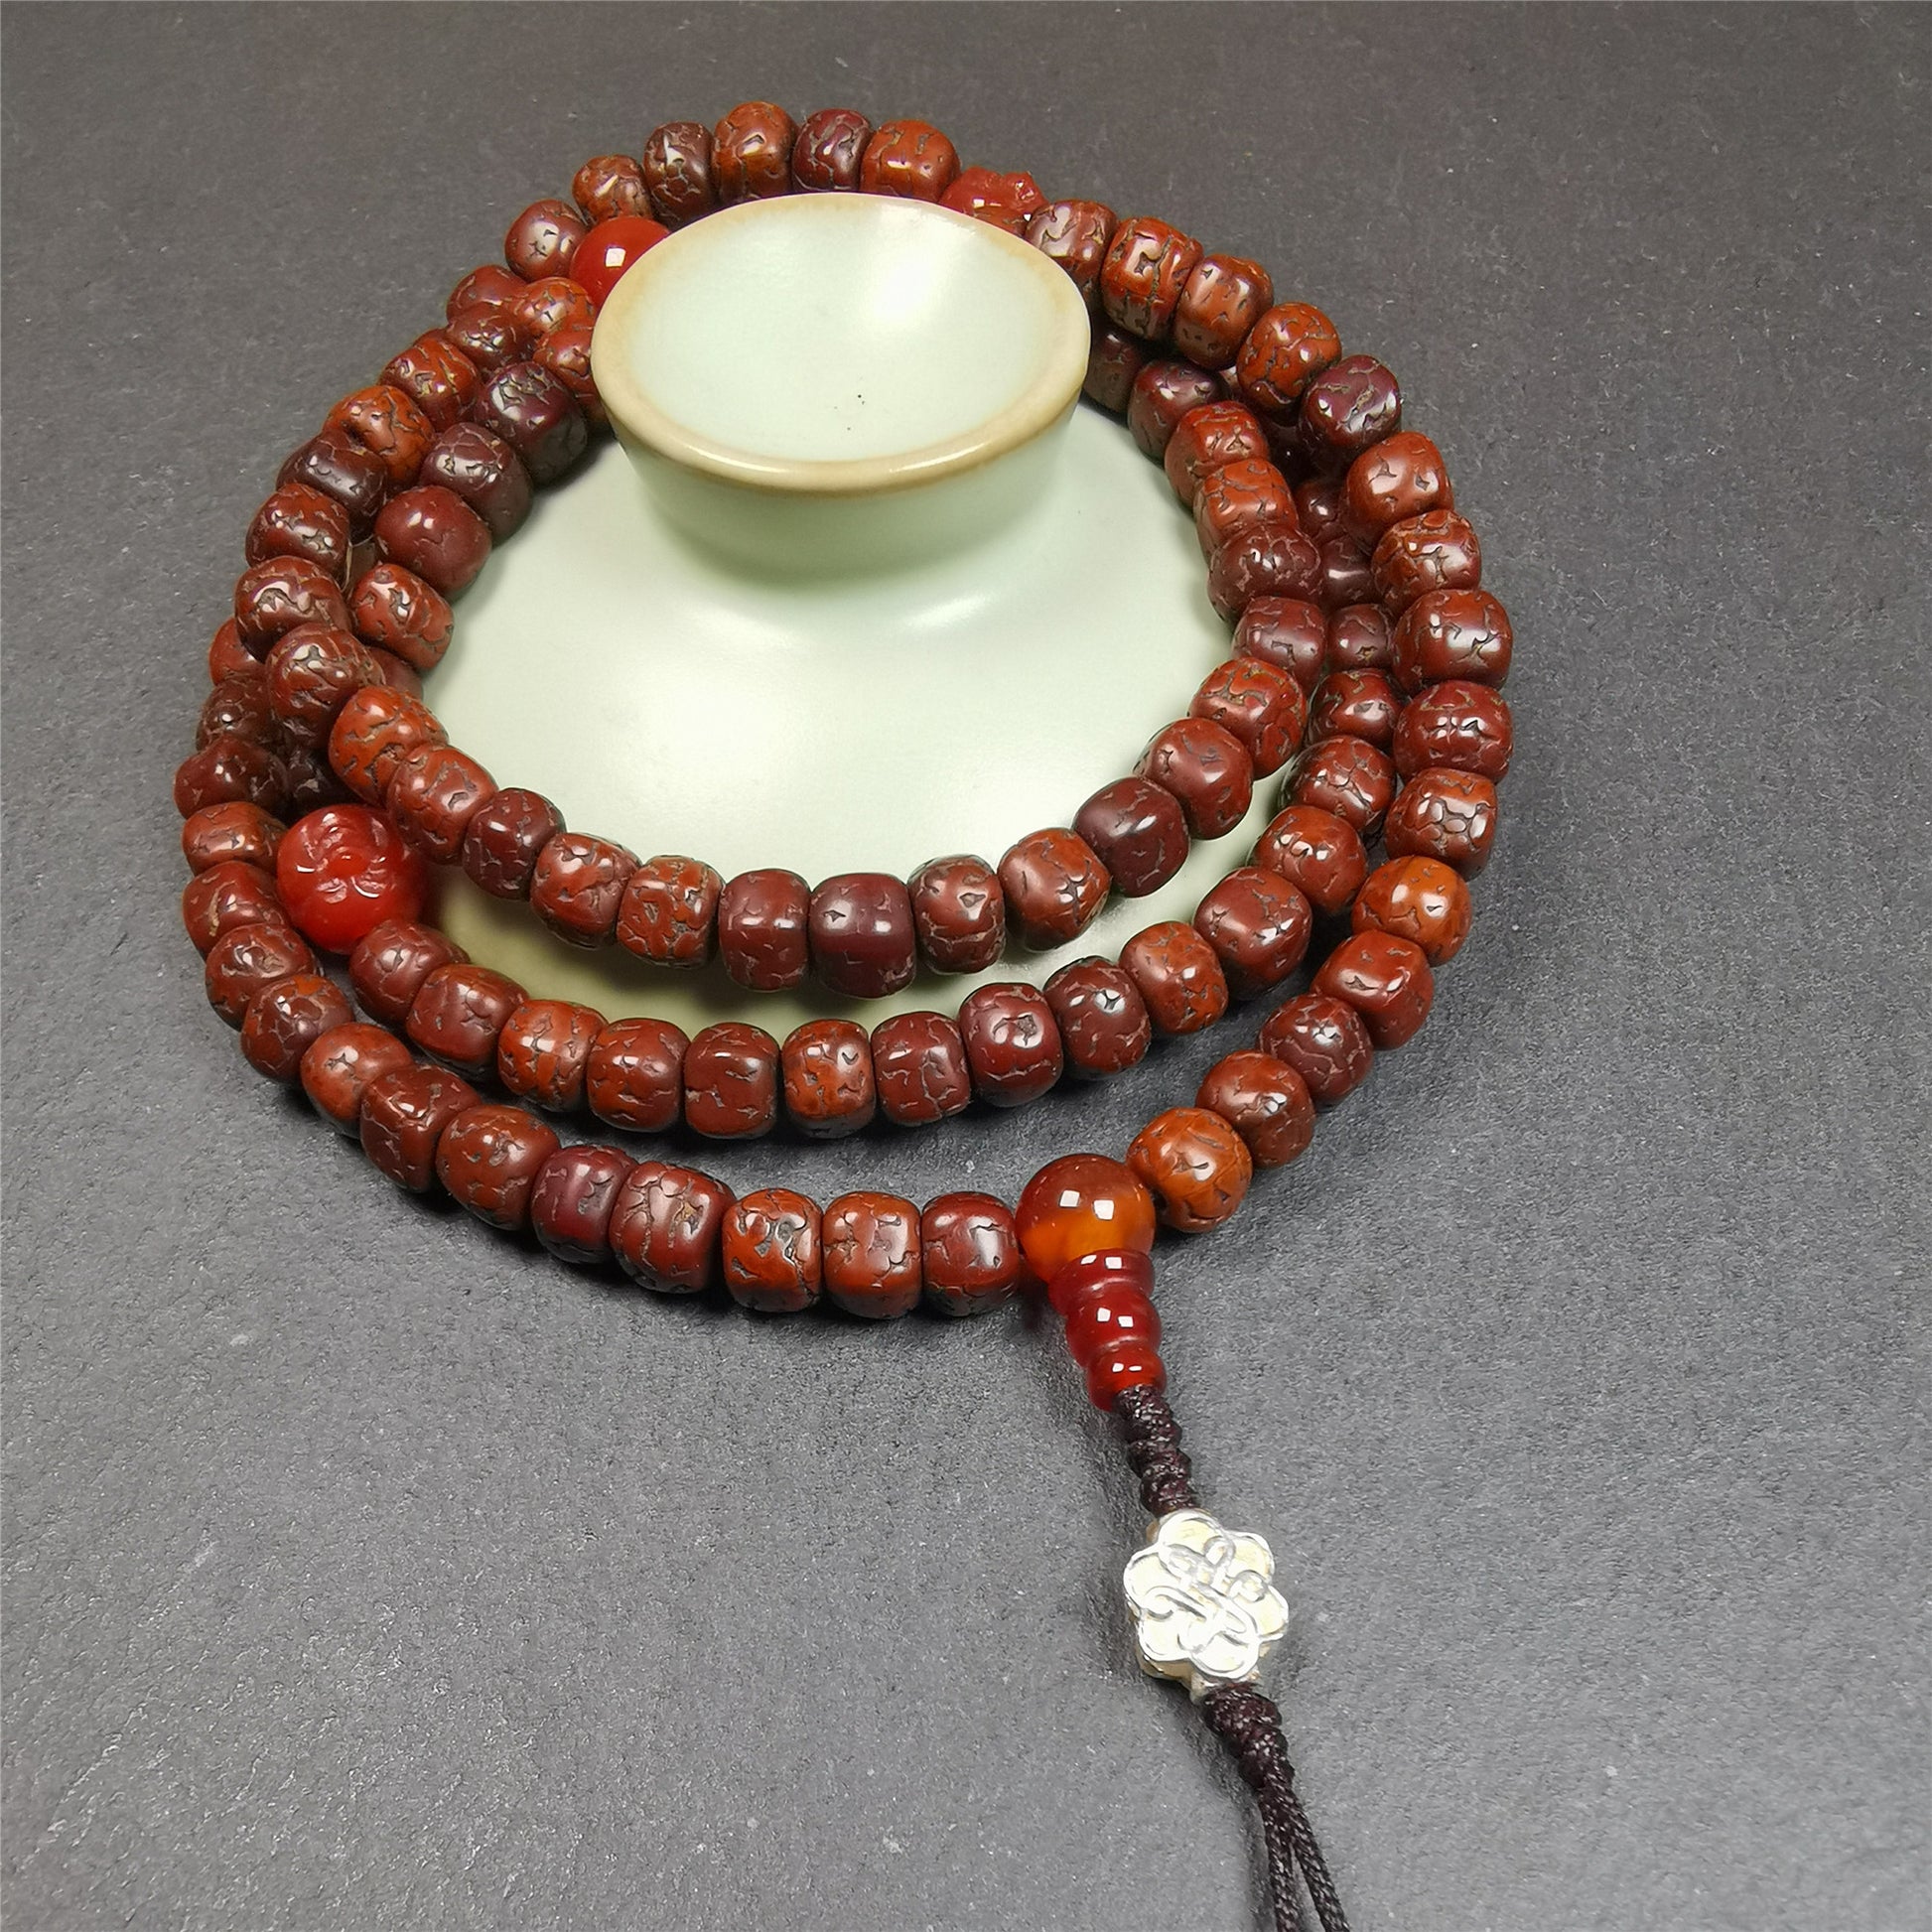 This old rudraksha mala was handmade from tibetan crafts man in Baiyu County. It's composed of 108 pcs 7mm rudraksha beads,with agate beads,agate guru bead,and silver lucky knot pendant. Great Mala For Meditation and Yoga Practitioners.